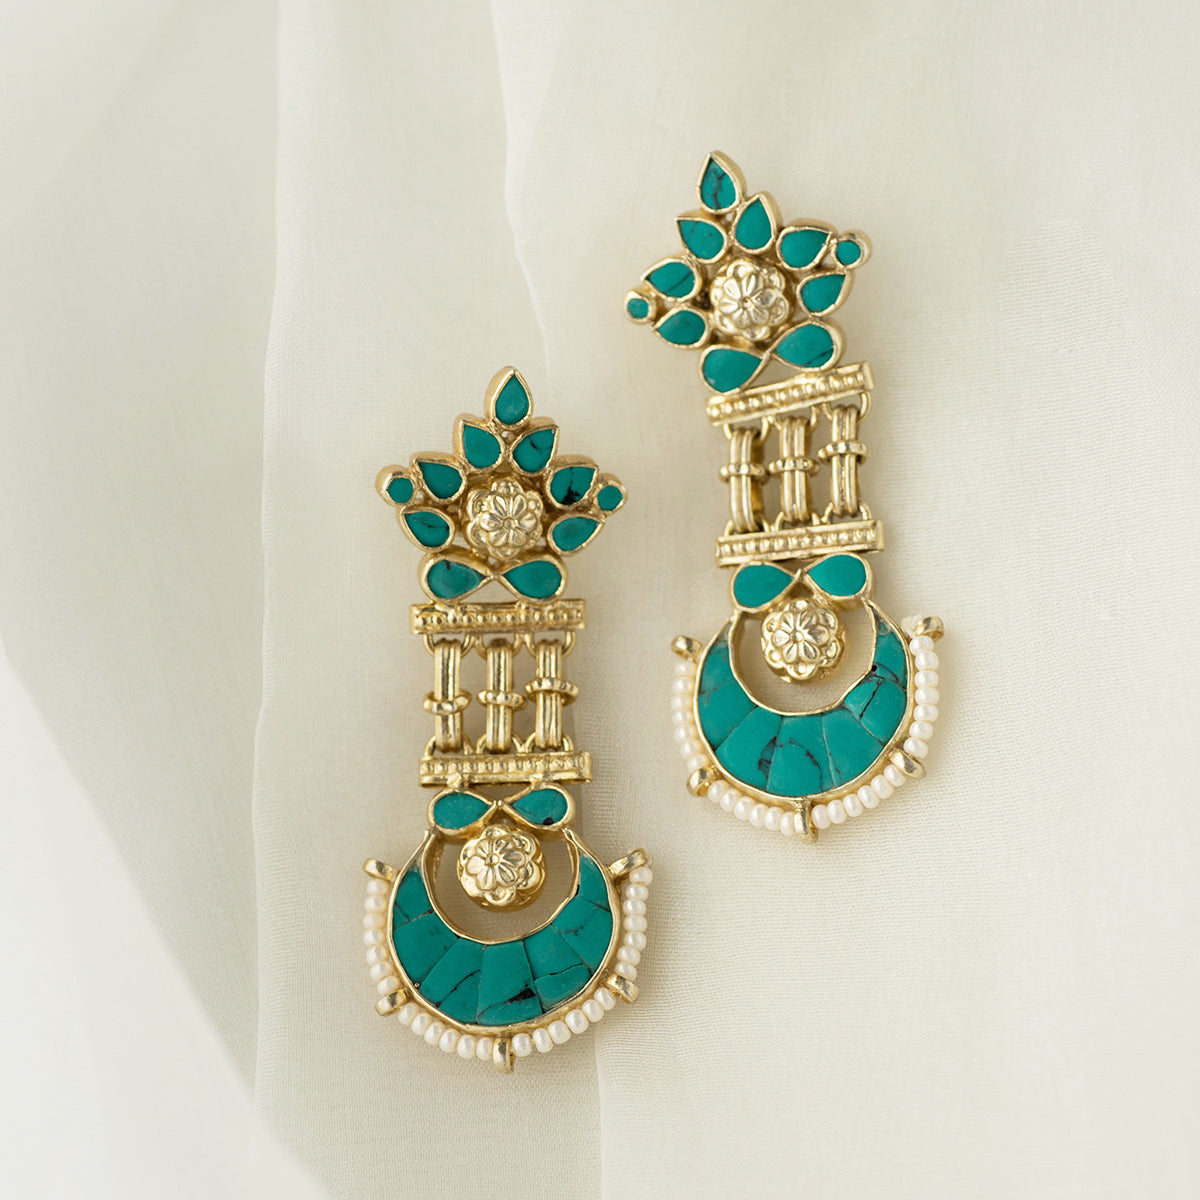 Templetree earrings - Turquoise